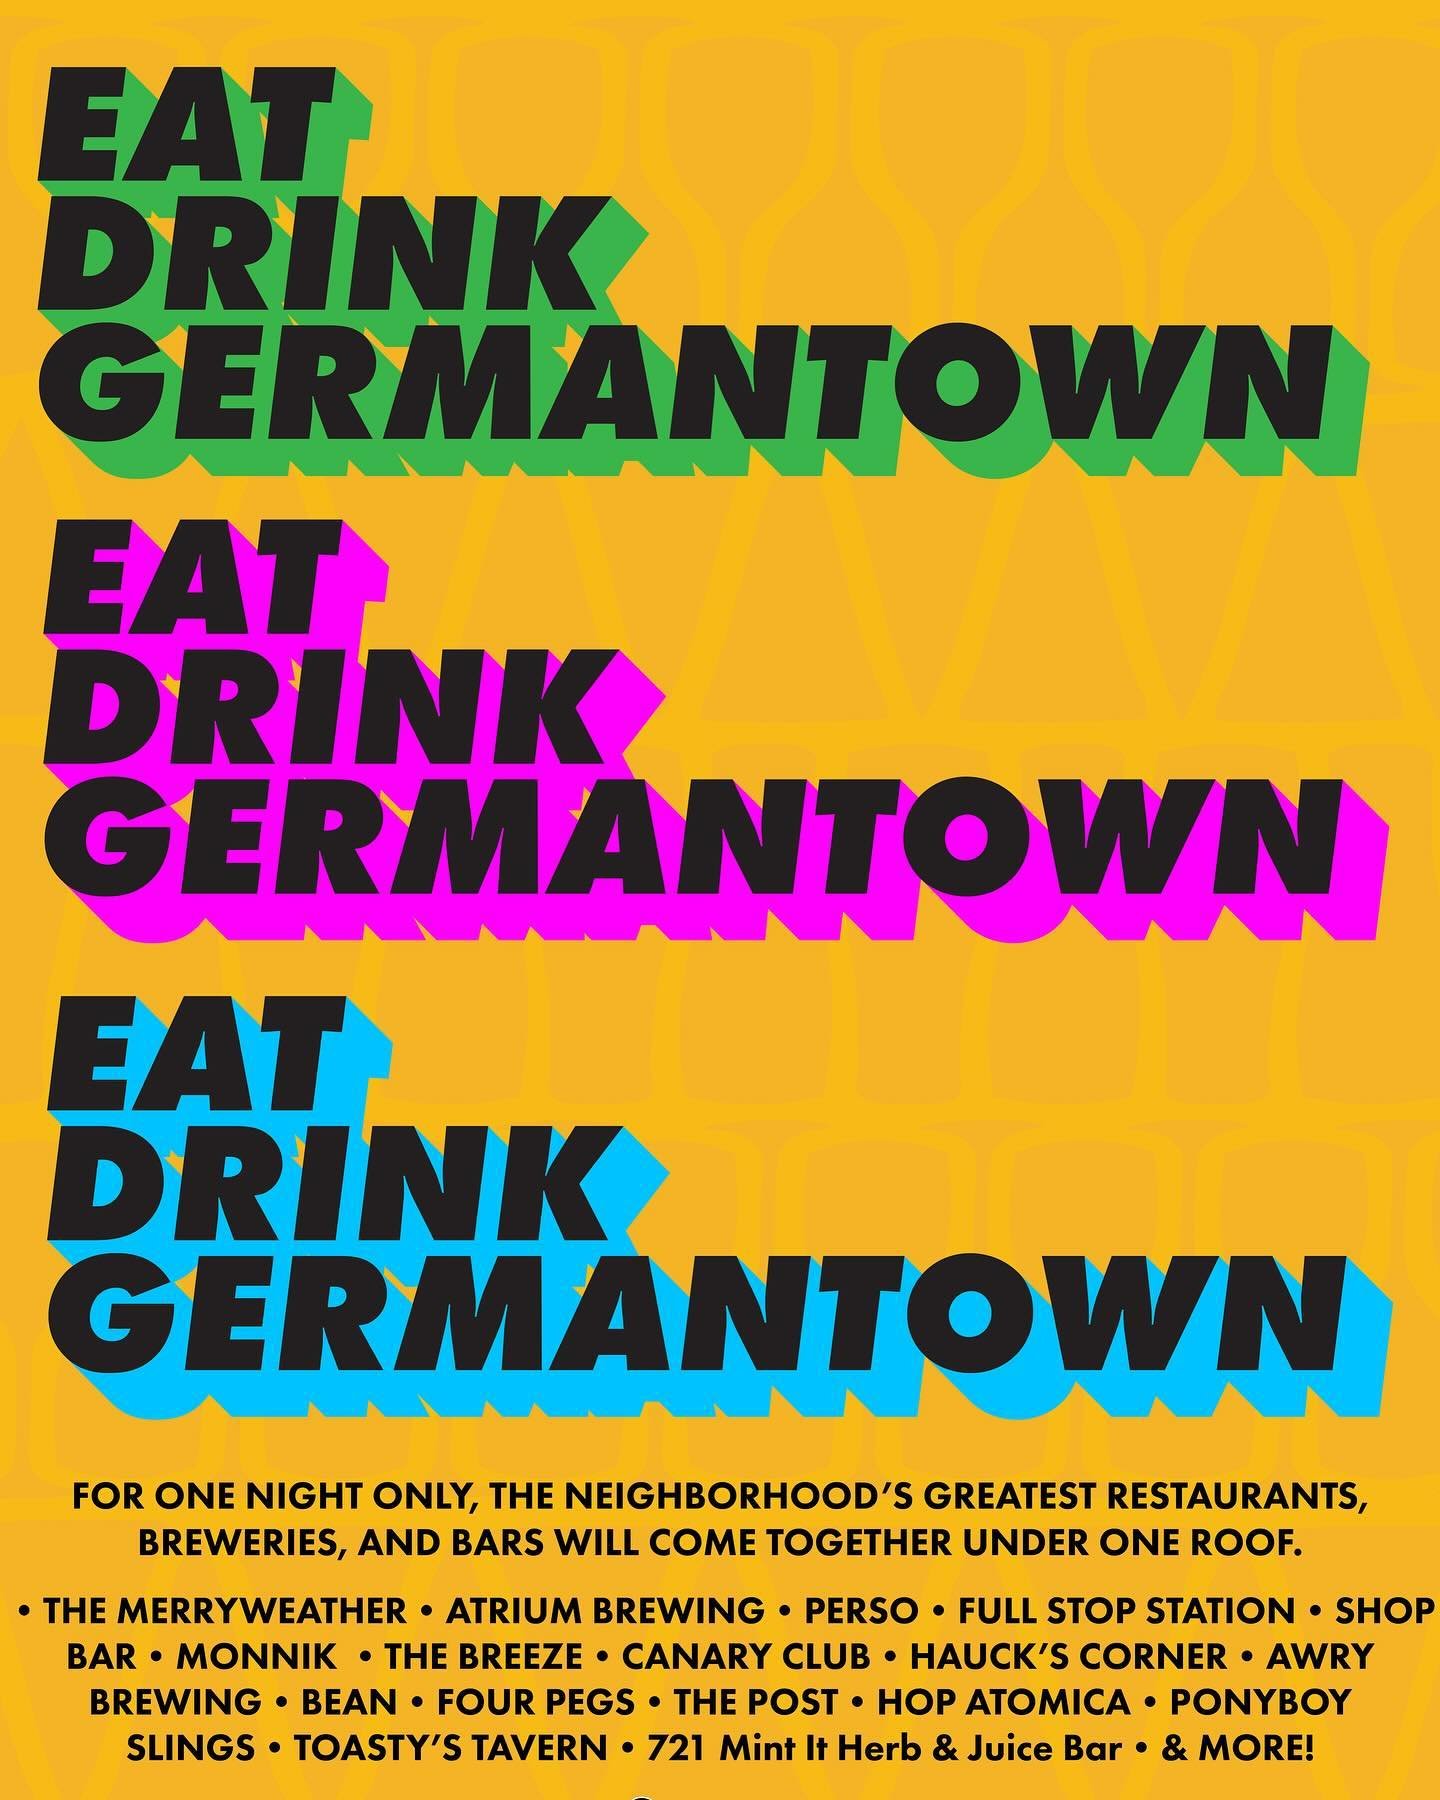 Tonight is Eat Drink Germantown!!! We will be at the Germantown Gables tonight slinging samples at the event. Come see us if you plan to join! 🥑☕️👀

Thanks to @greatergermantown for having us. We can&rsquo;t wait to hang out with all our fav local 